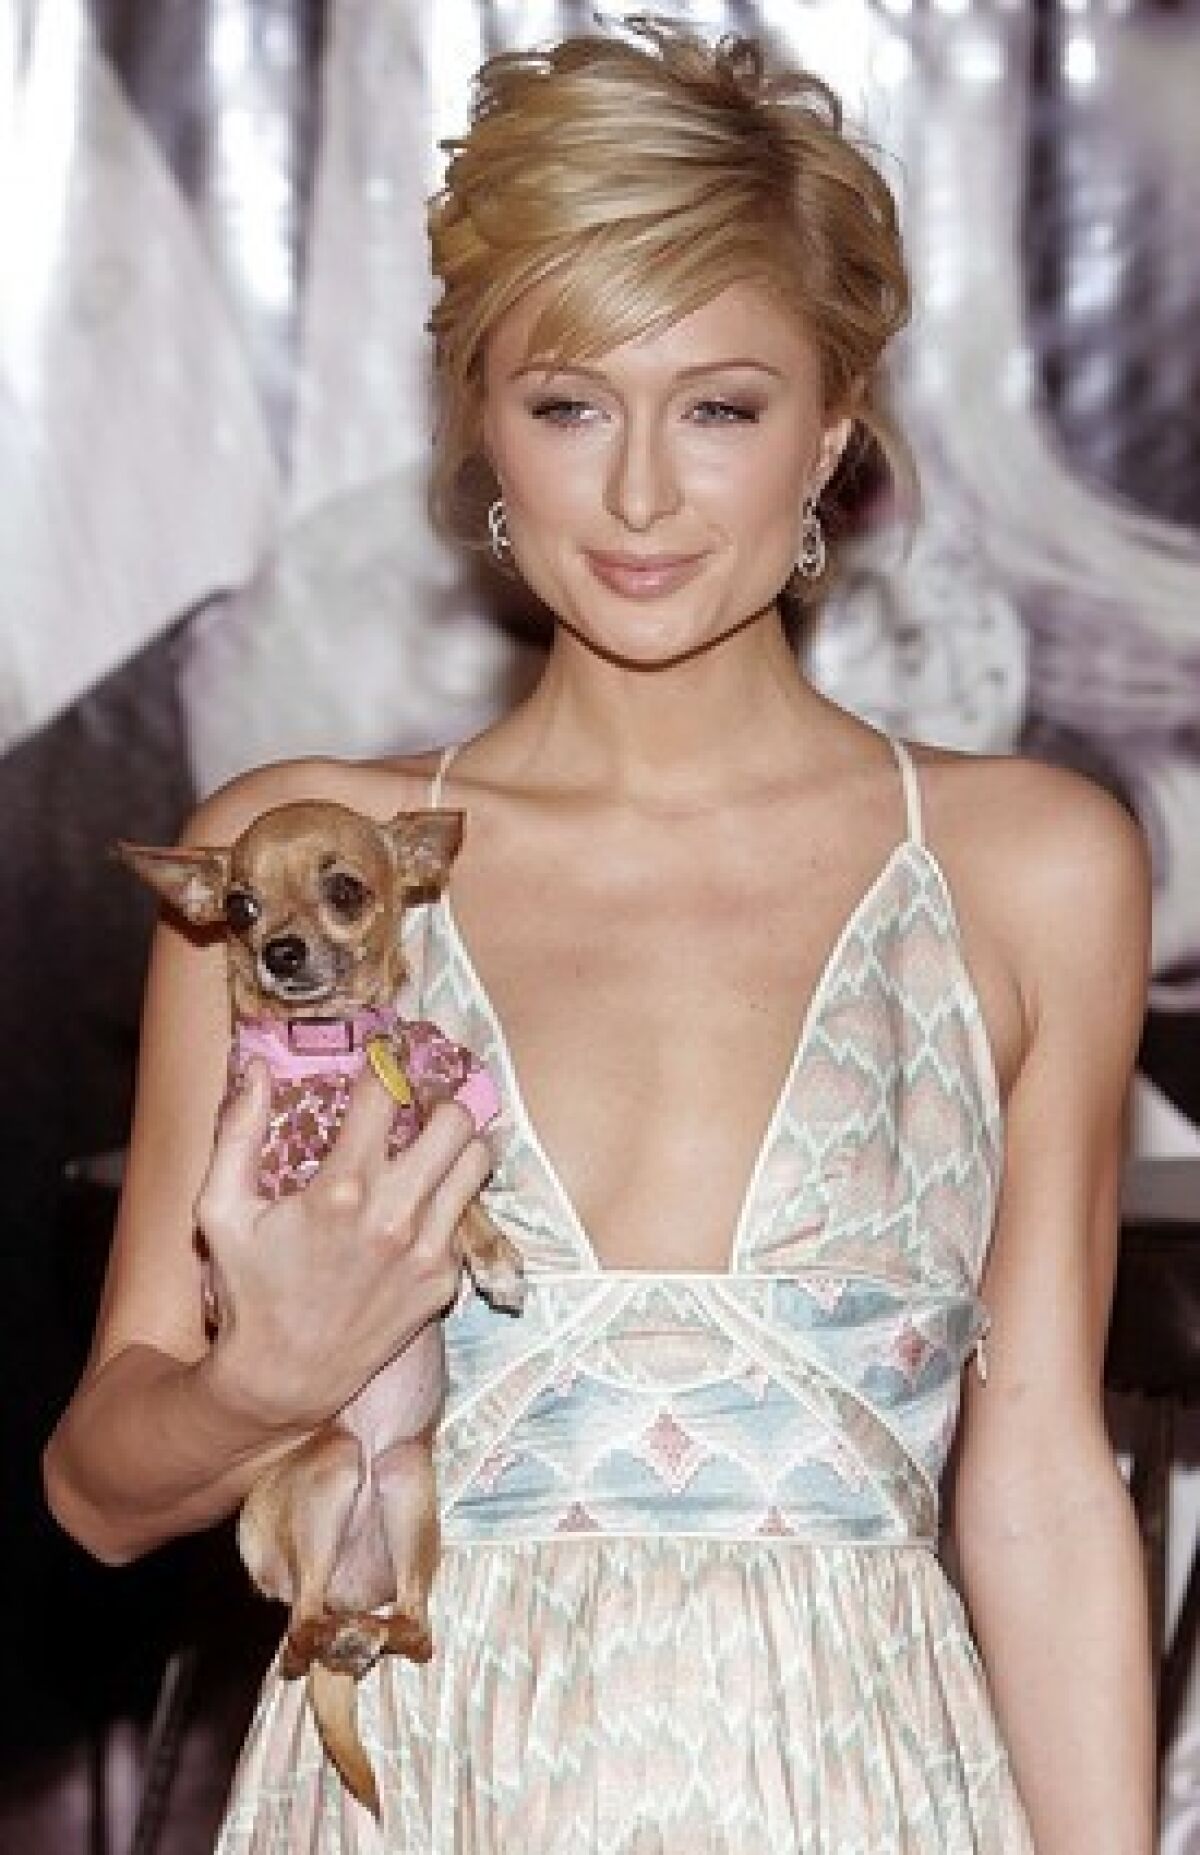 Paris Hilton, holding her chihuahua Tinkerbell in one hand